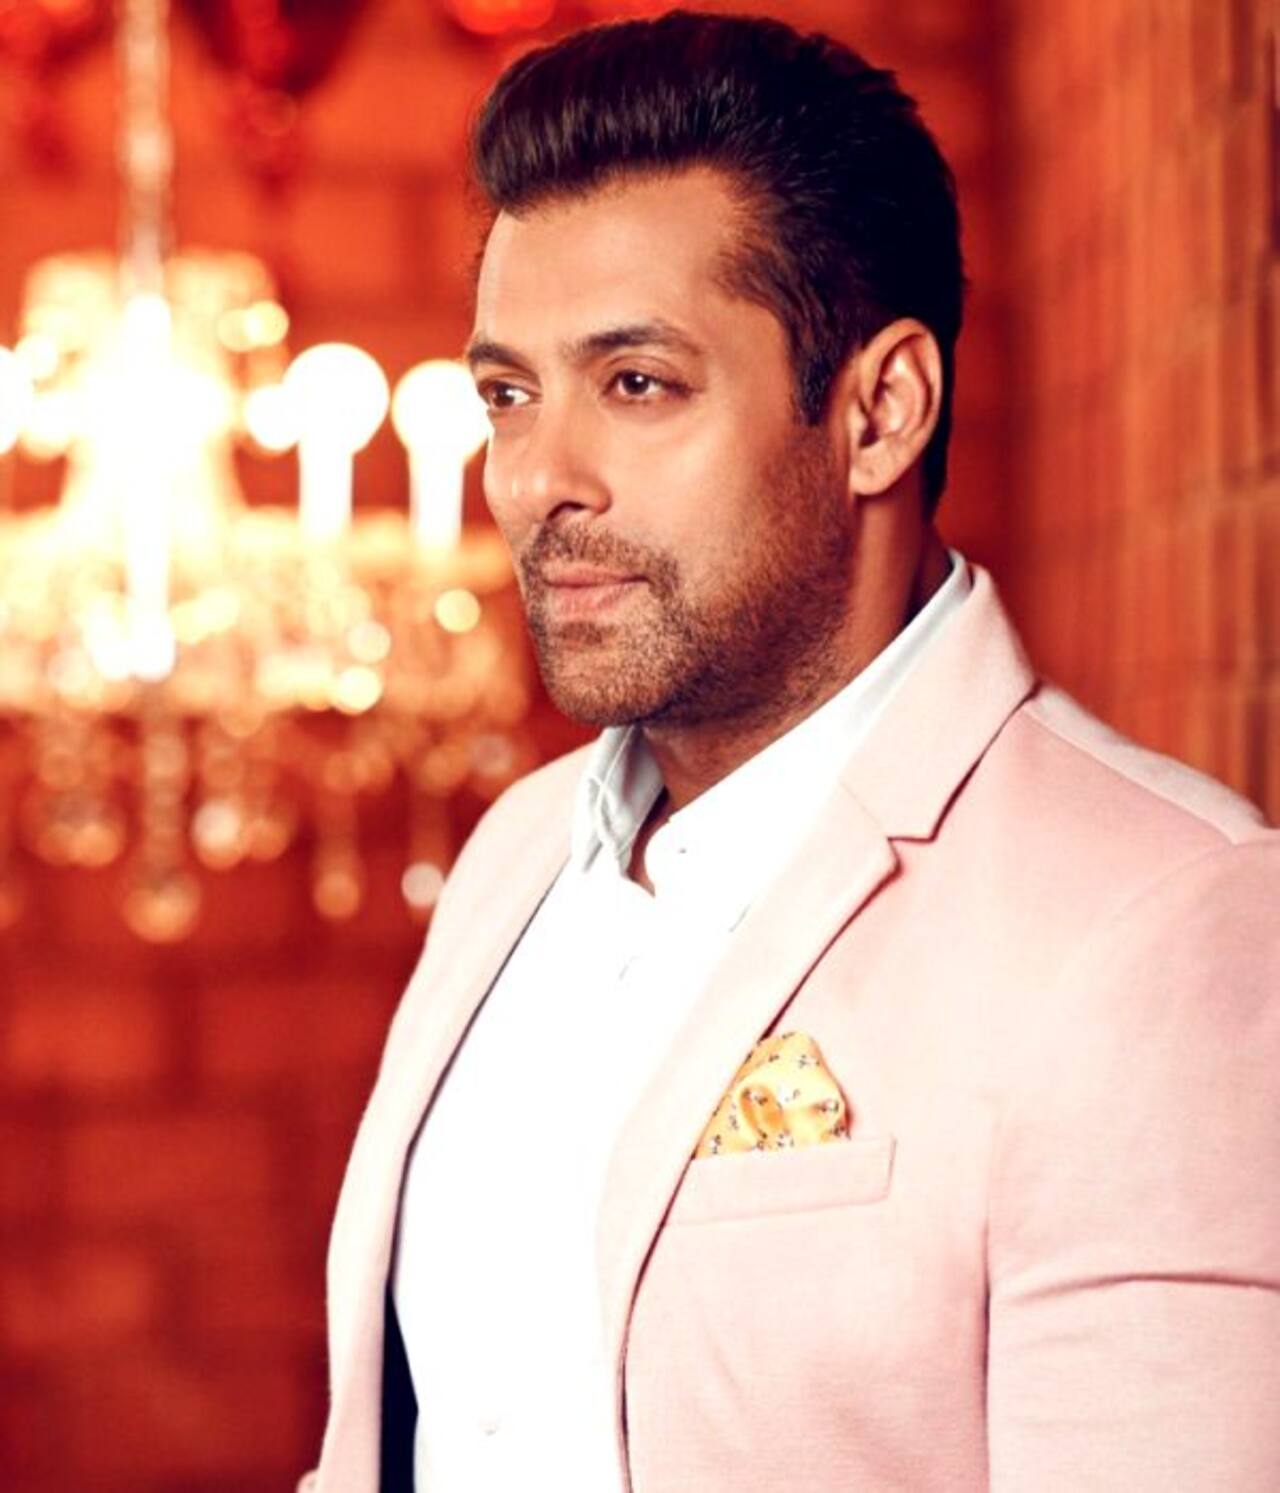 Exclusive! Bigg Boss 12: Makers on the lookout for a real life lesbian or gay couple for Salman Khan's show?